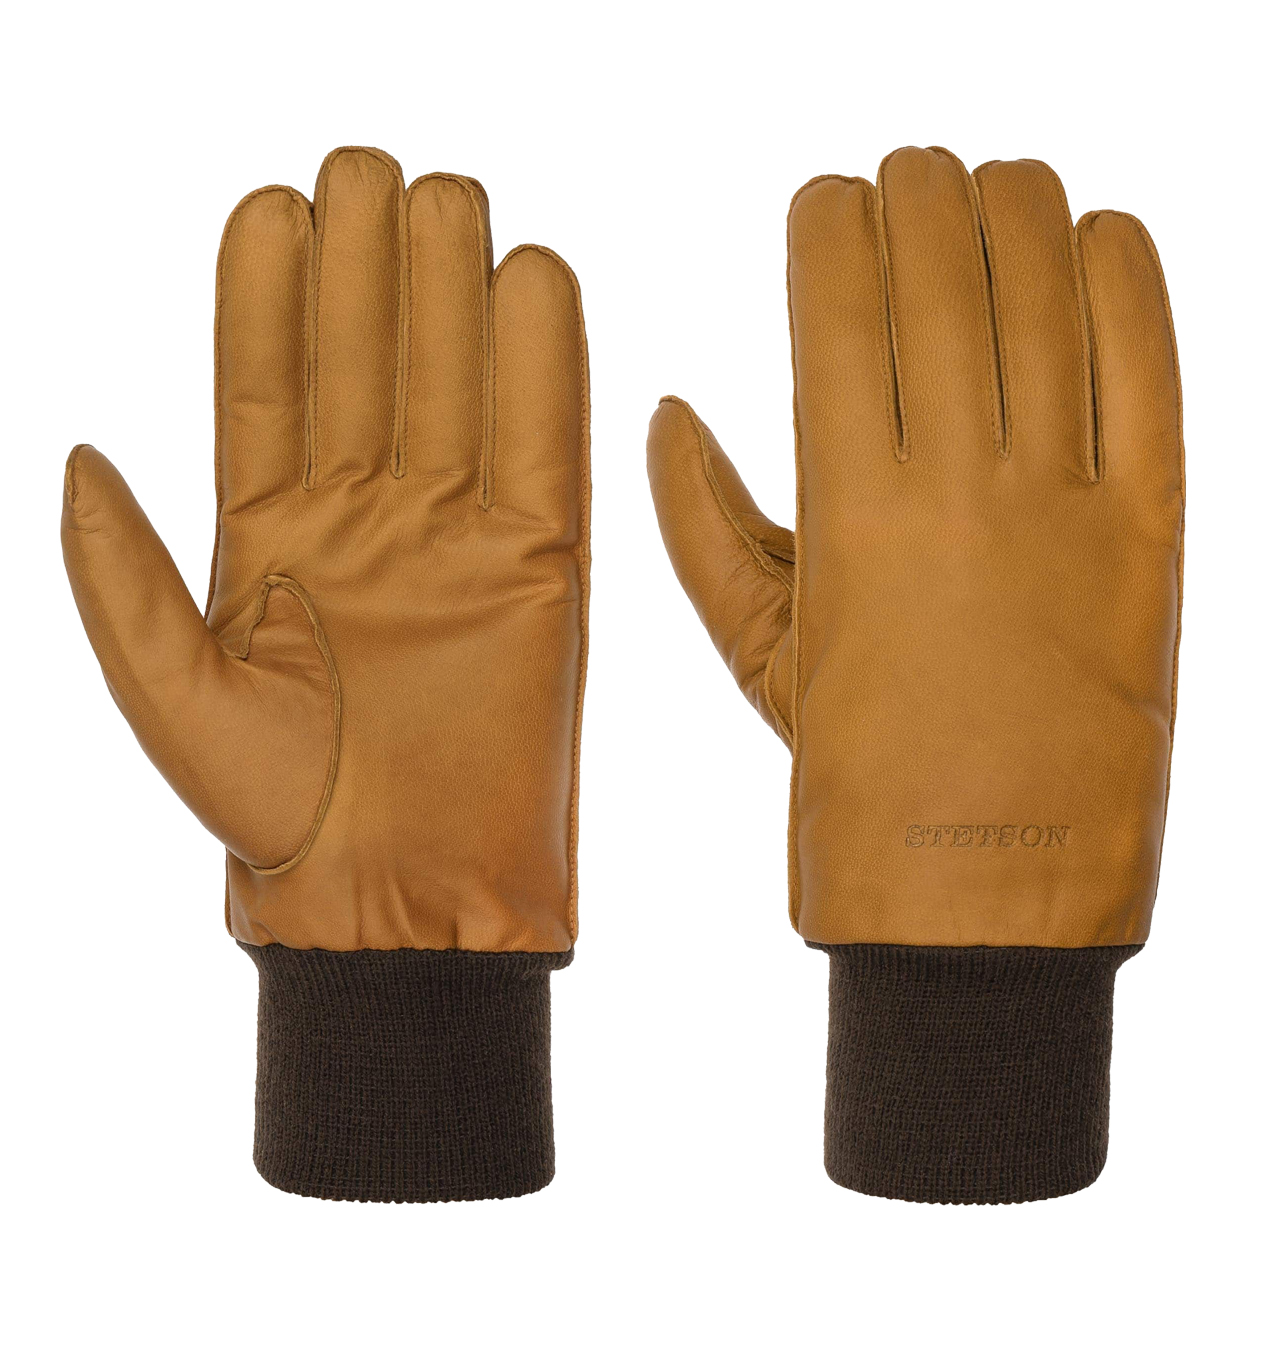 Stetson - Goat-Nappa Leather Gloves - Light Brown